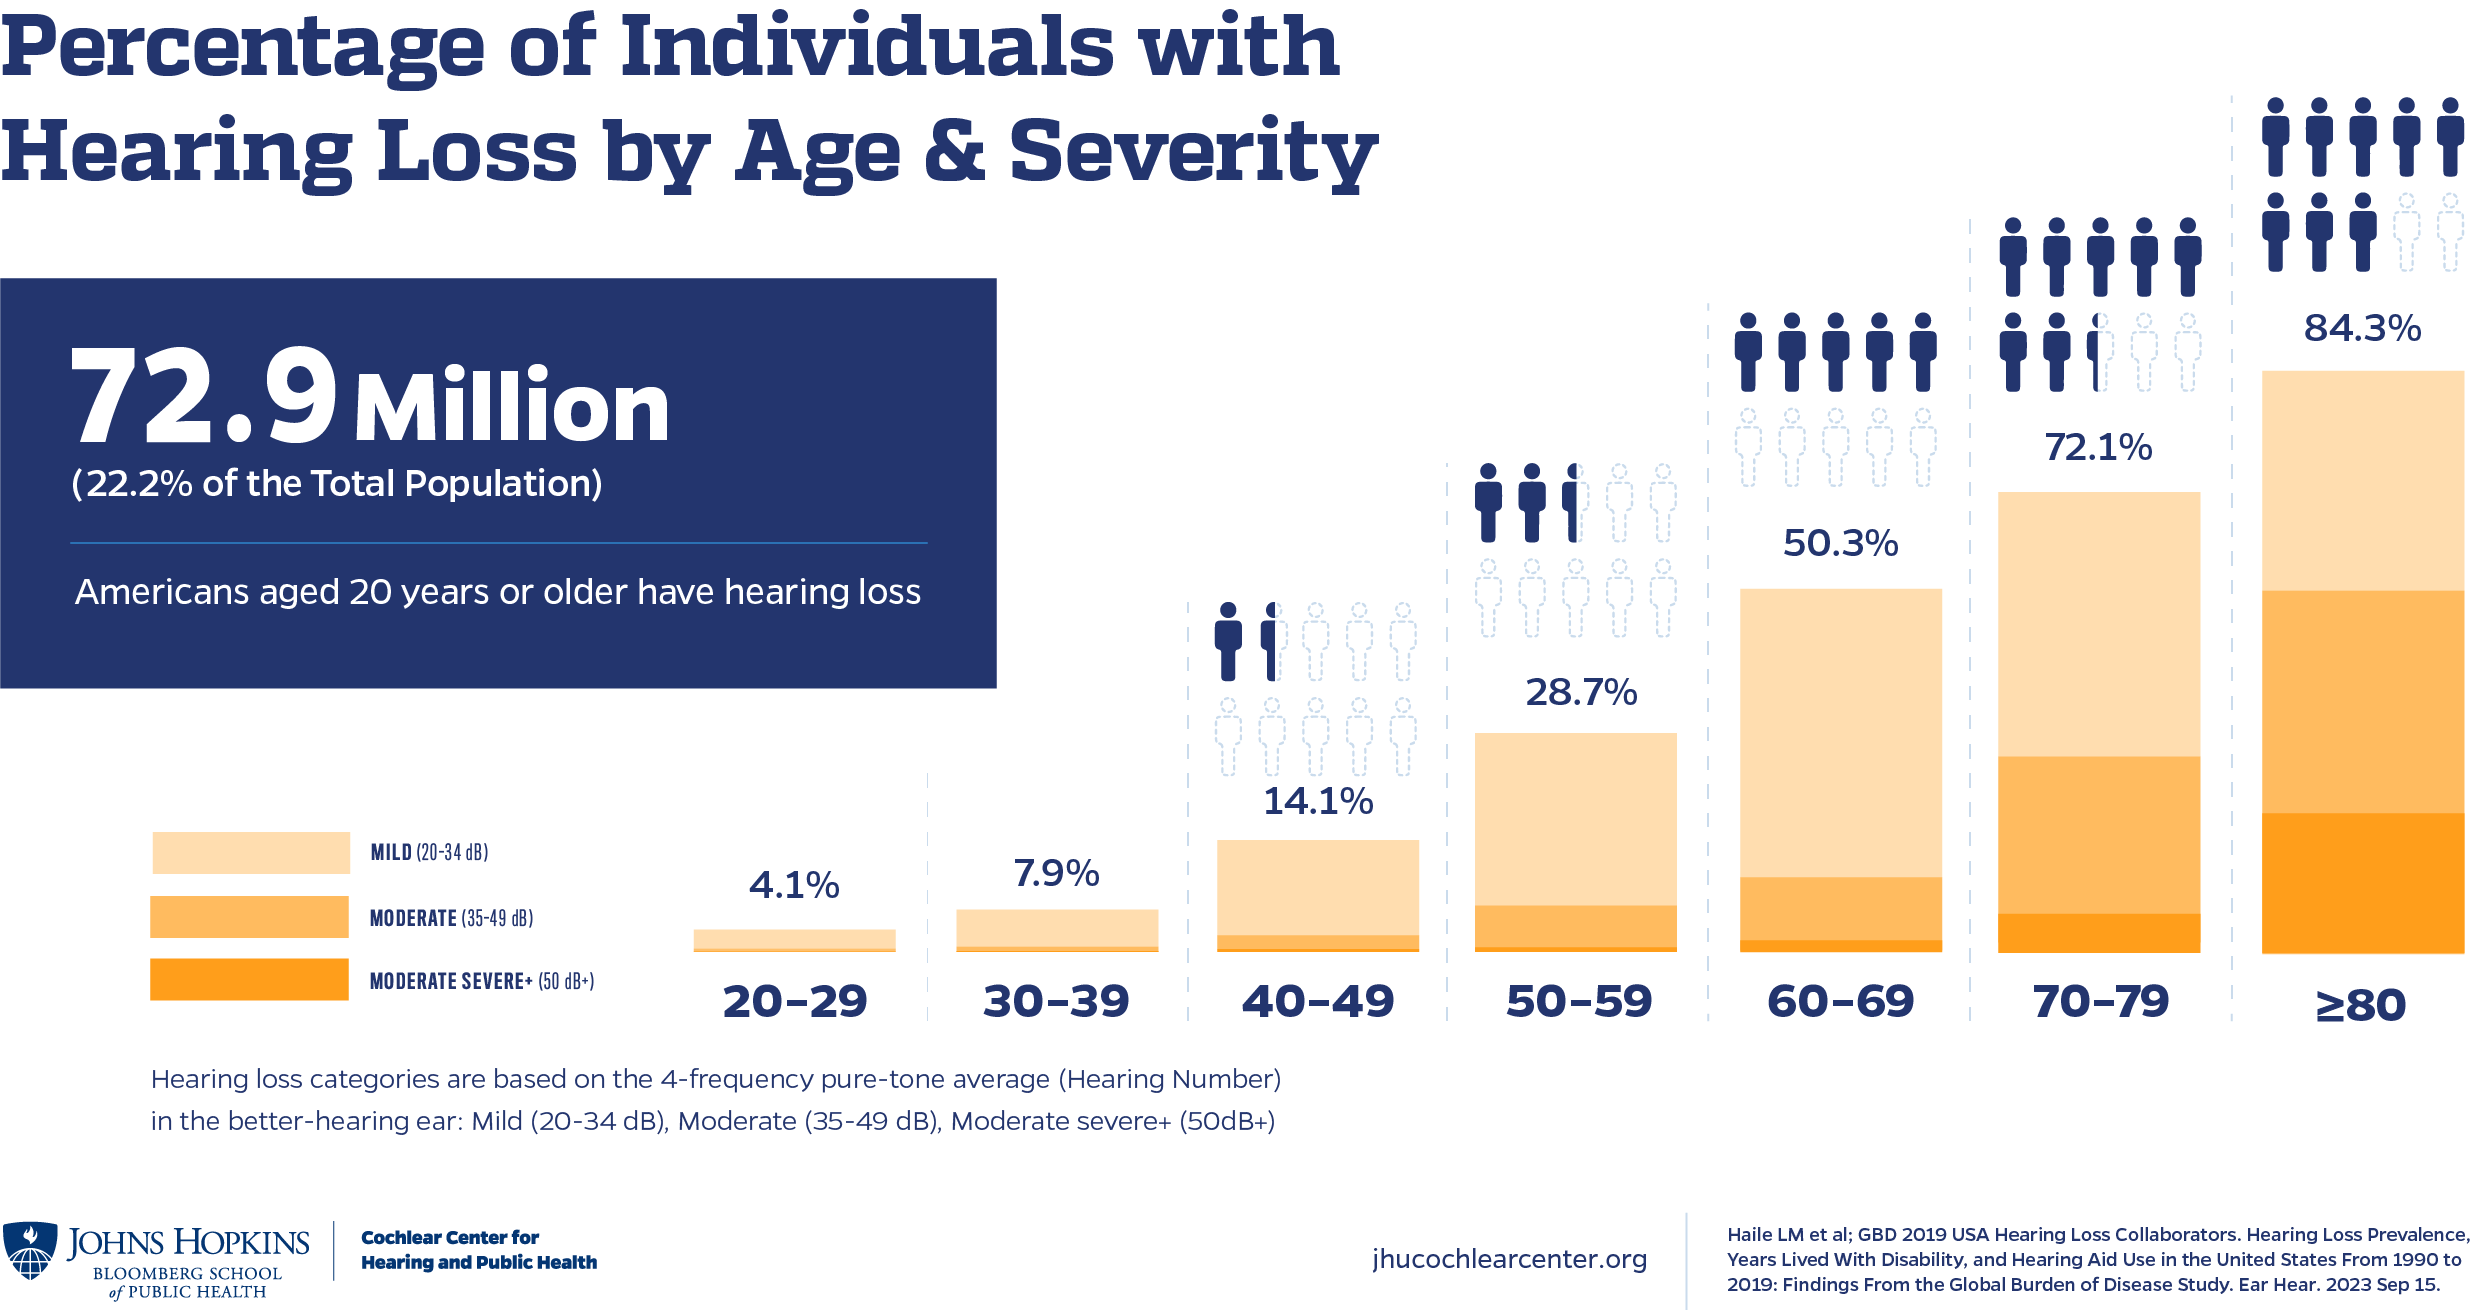 Infographic of Hearing Loss Prevalence by Age & Severity